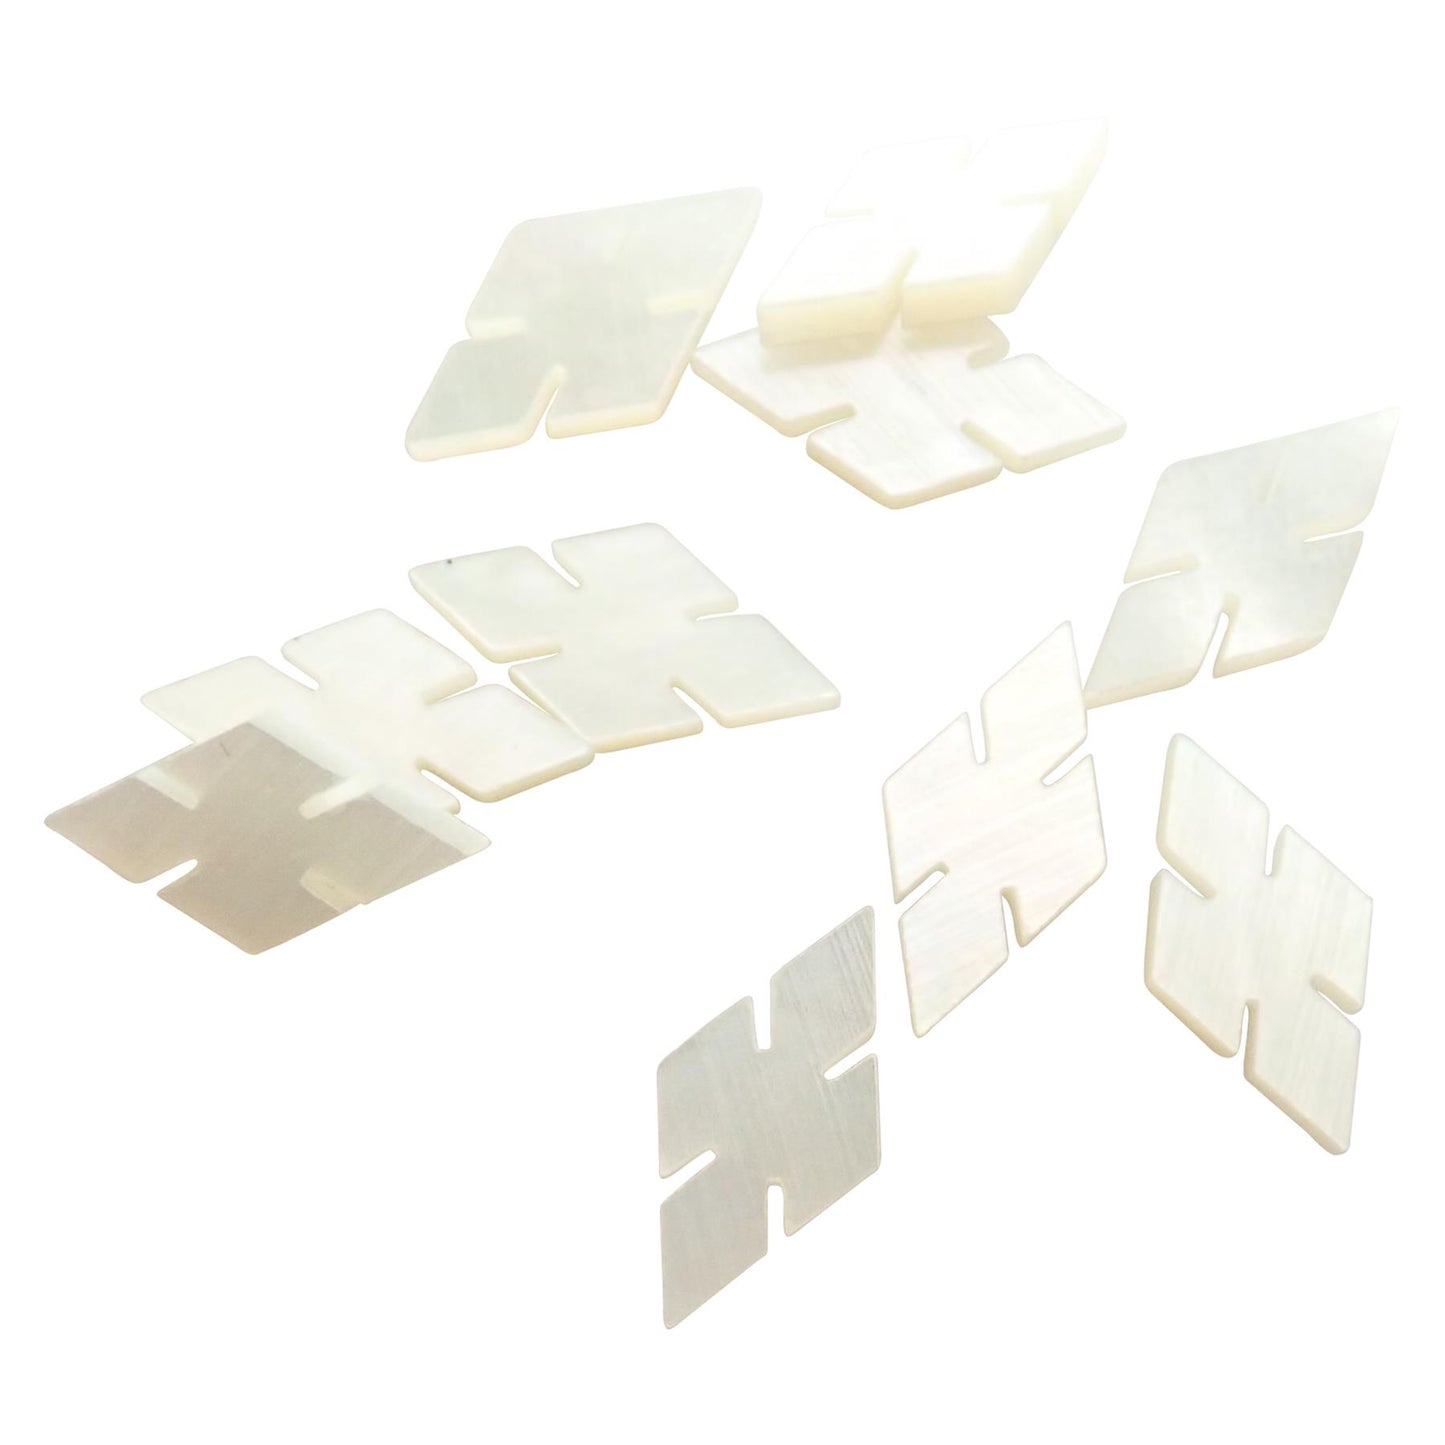 Incudo White Pearl Mother of Pearl Notched Diamond Inlays - 10mm (0.394"), Pack of 10